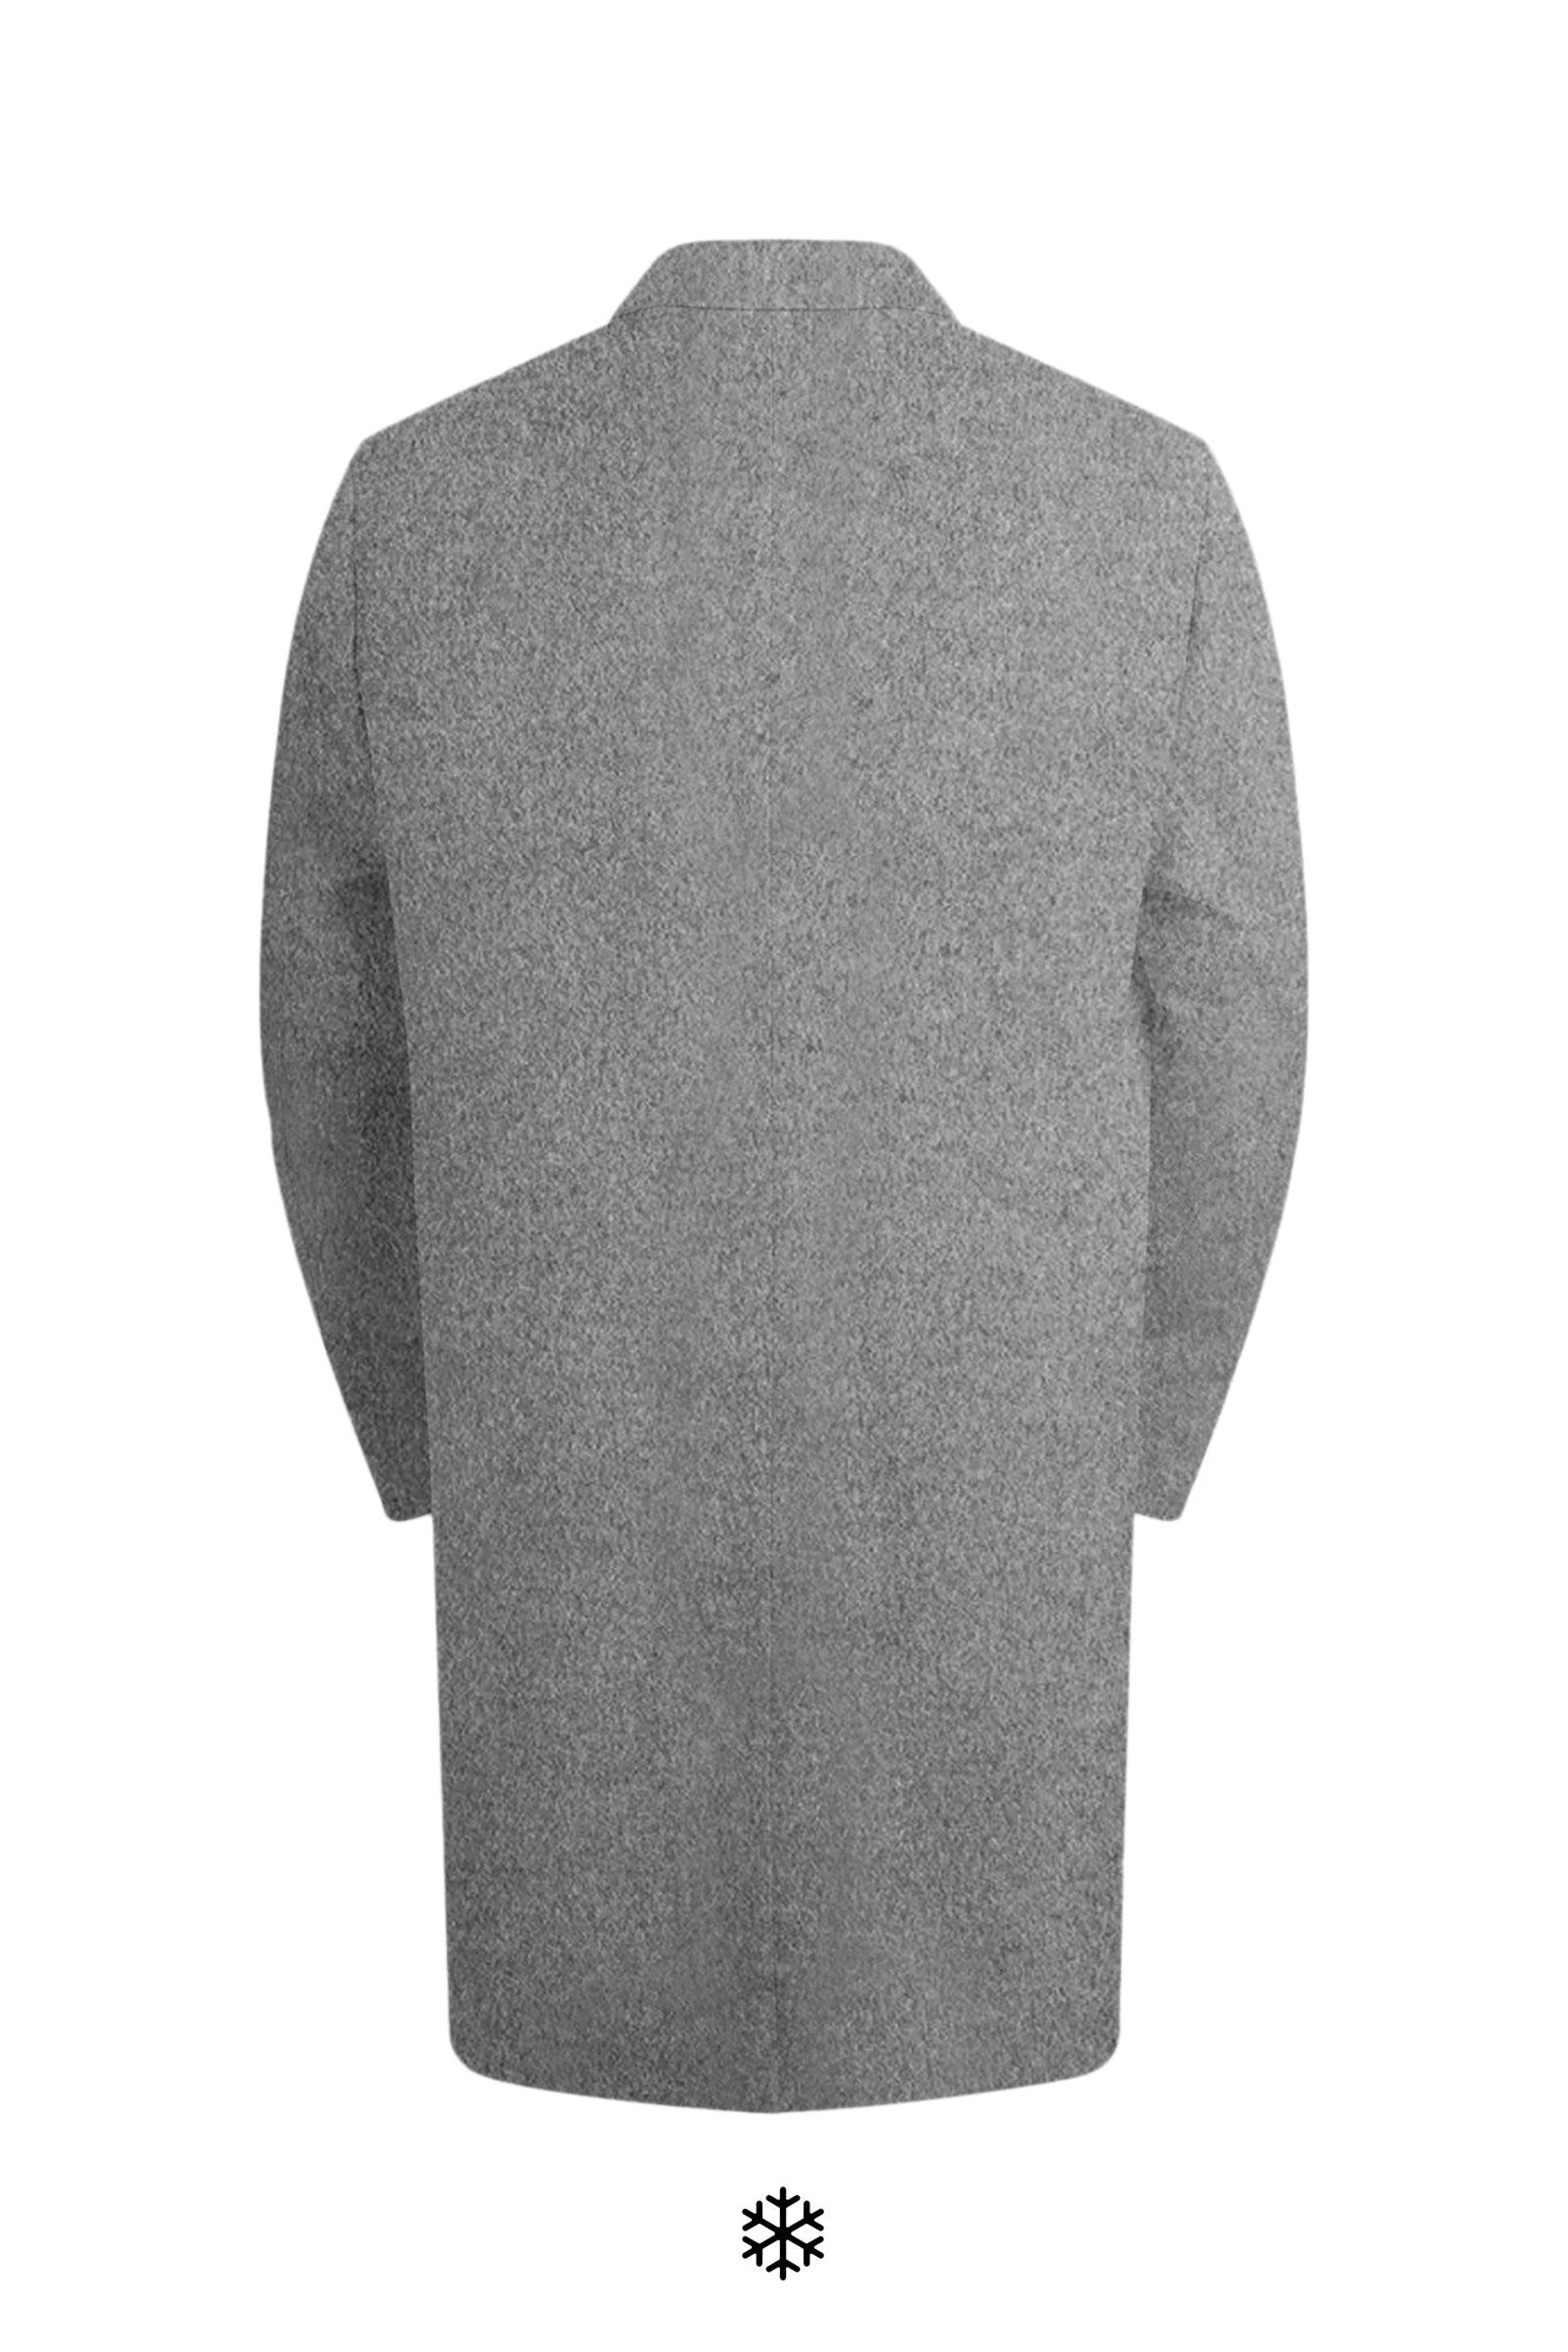 THOMAS WOOL & CASHMERE GREY OVERCOAT - MENS - Cardinal of Canada-CA - Thomas wool and cashmere topcoat in grey